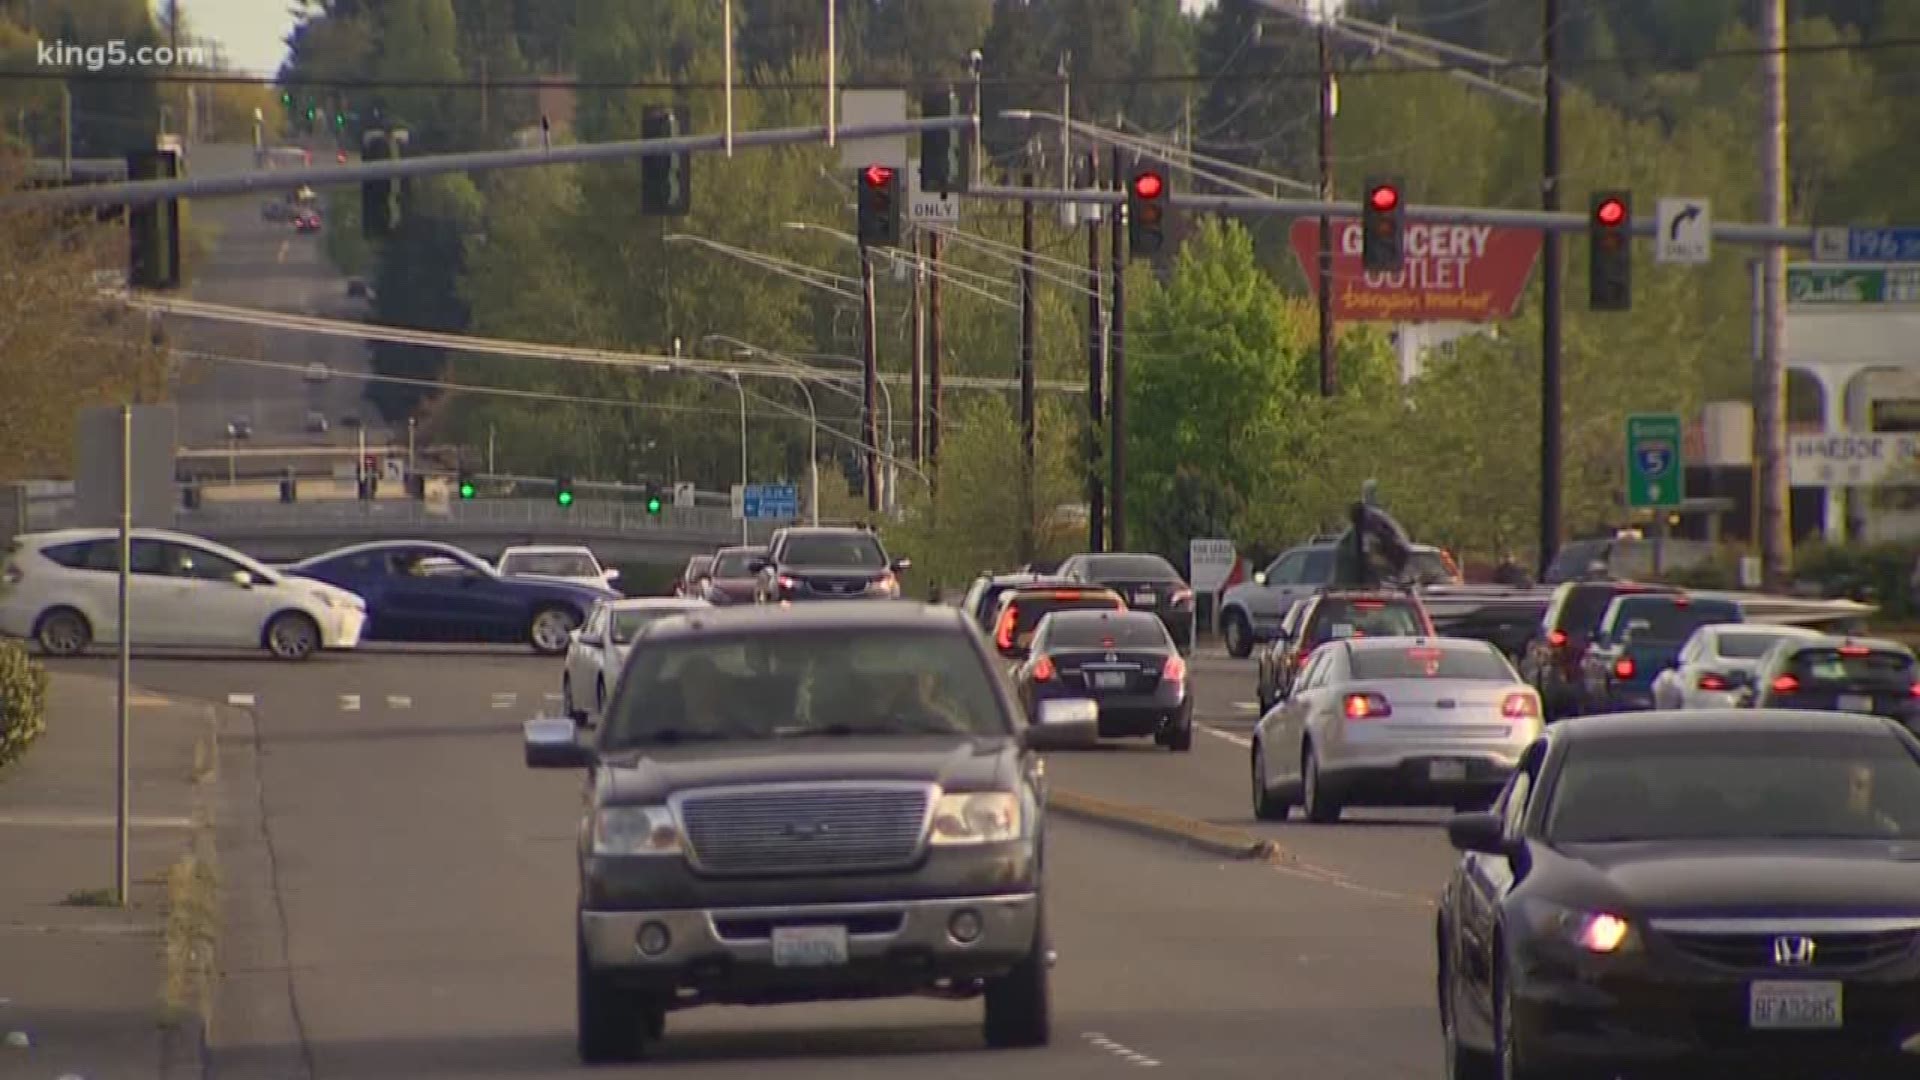 Lawmakers want people to cut out on distracted driving to keep roads safe.